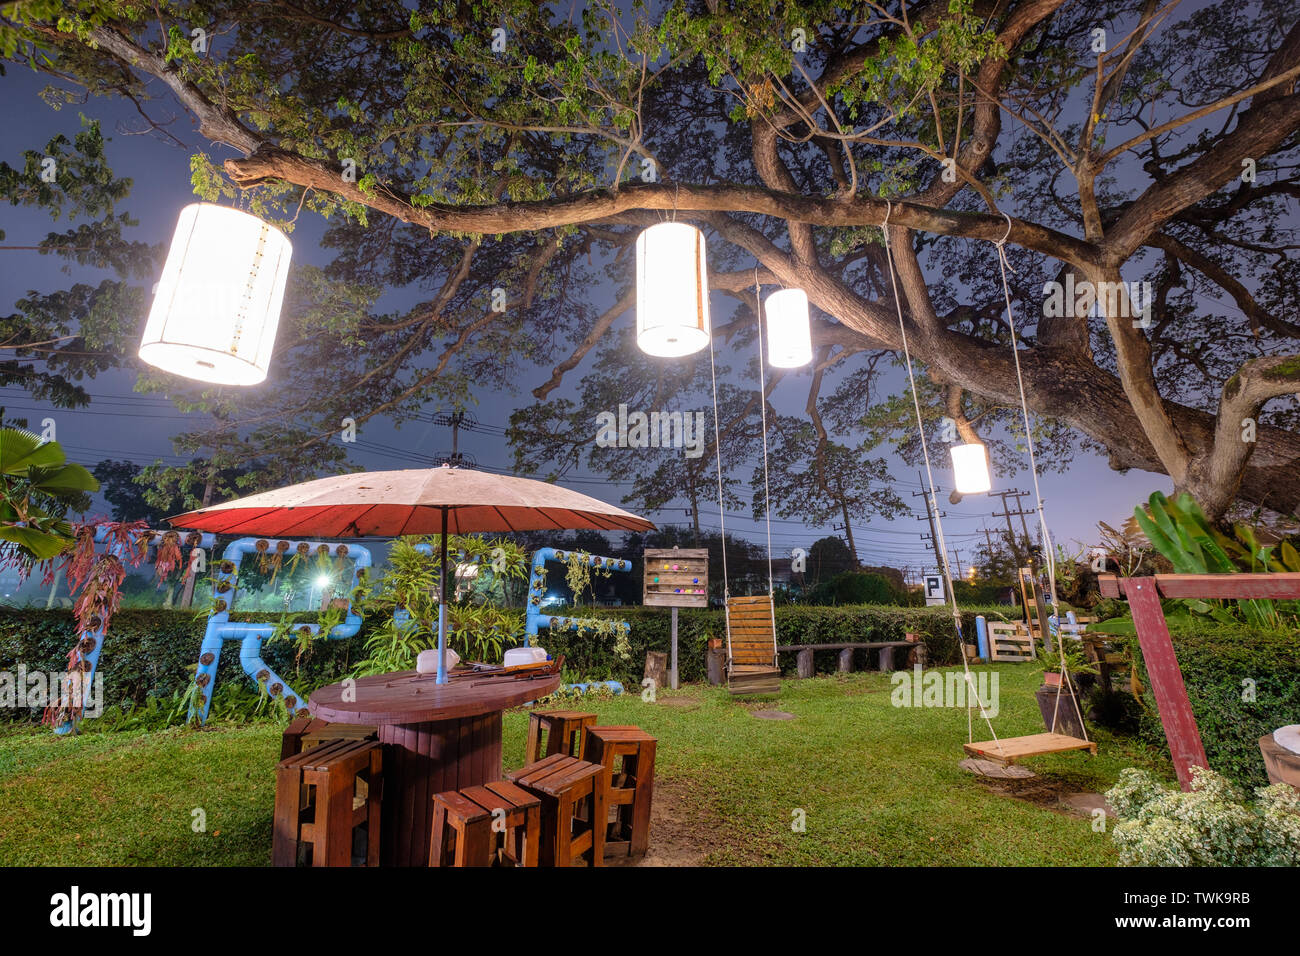 Big Rain tree decorative lighting craft lamp with wooden table chair on lawn in restaurant at dusk Stock Photo